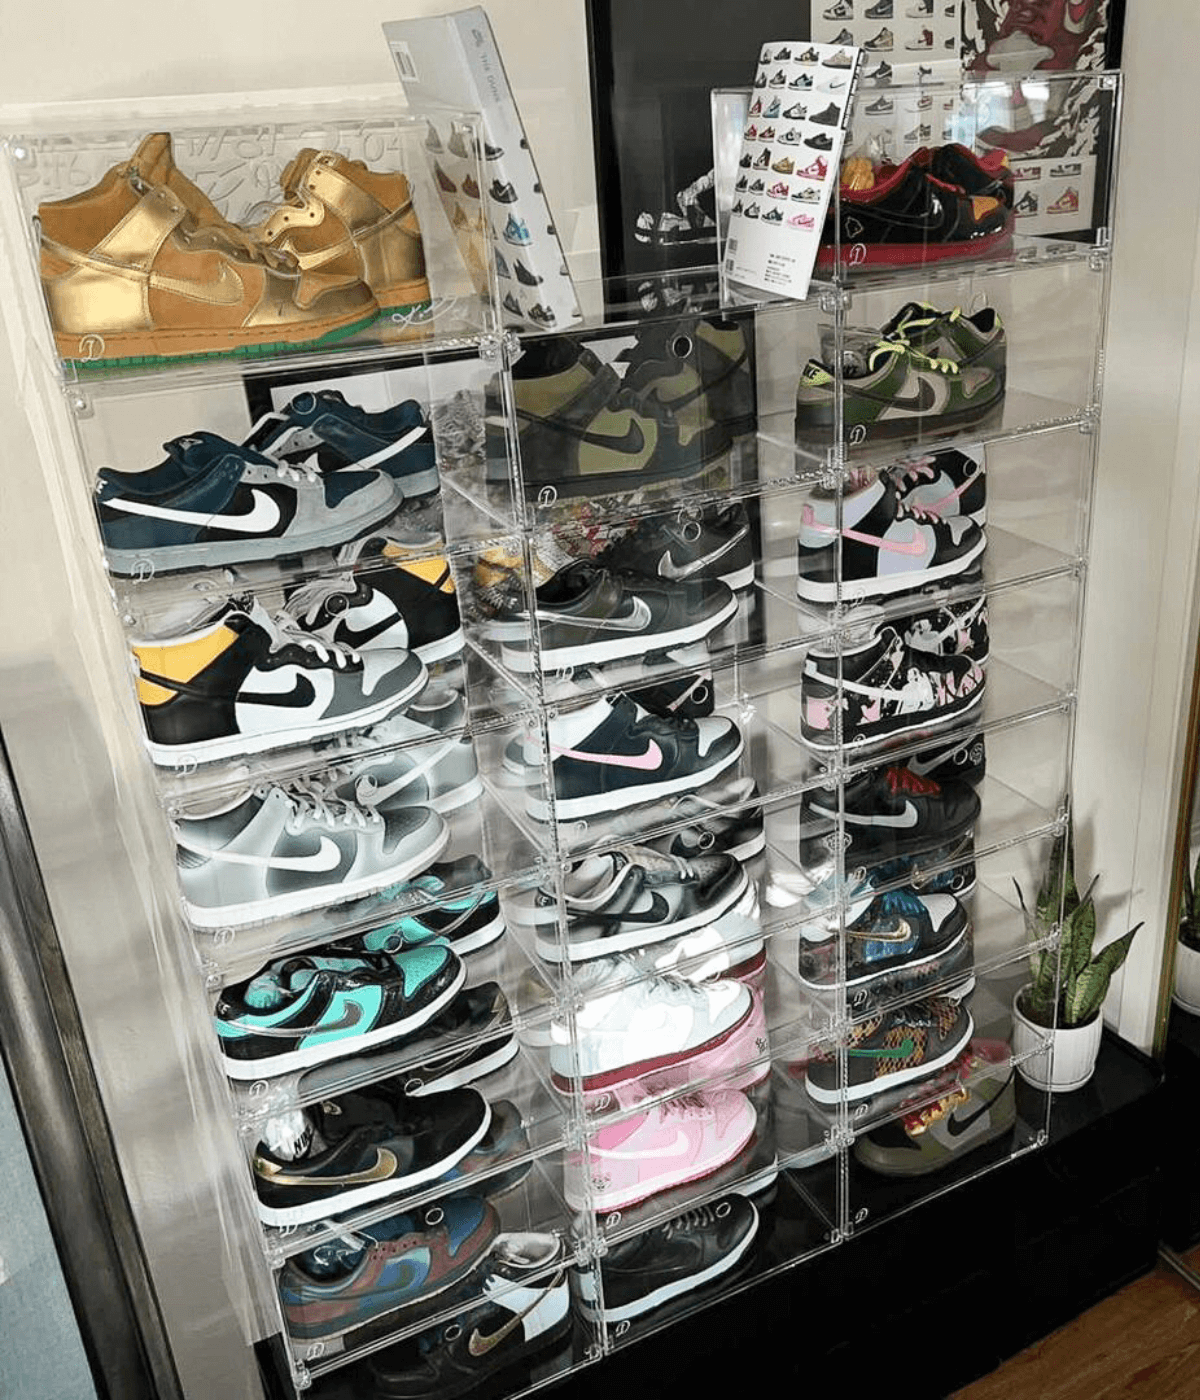 Looksee Designs - Premium Acrylic Shoe Displays - Collecting Made Modern - Clear Shoe Box - Acrylic Display Cases